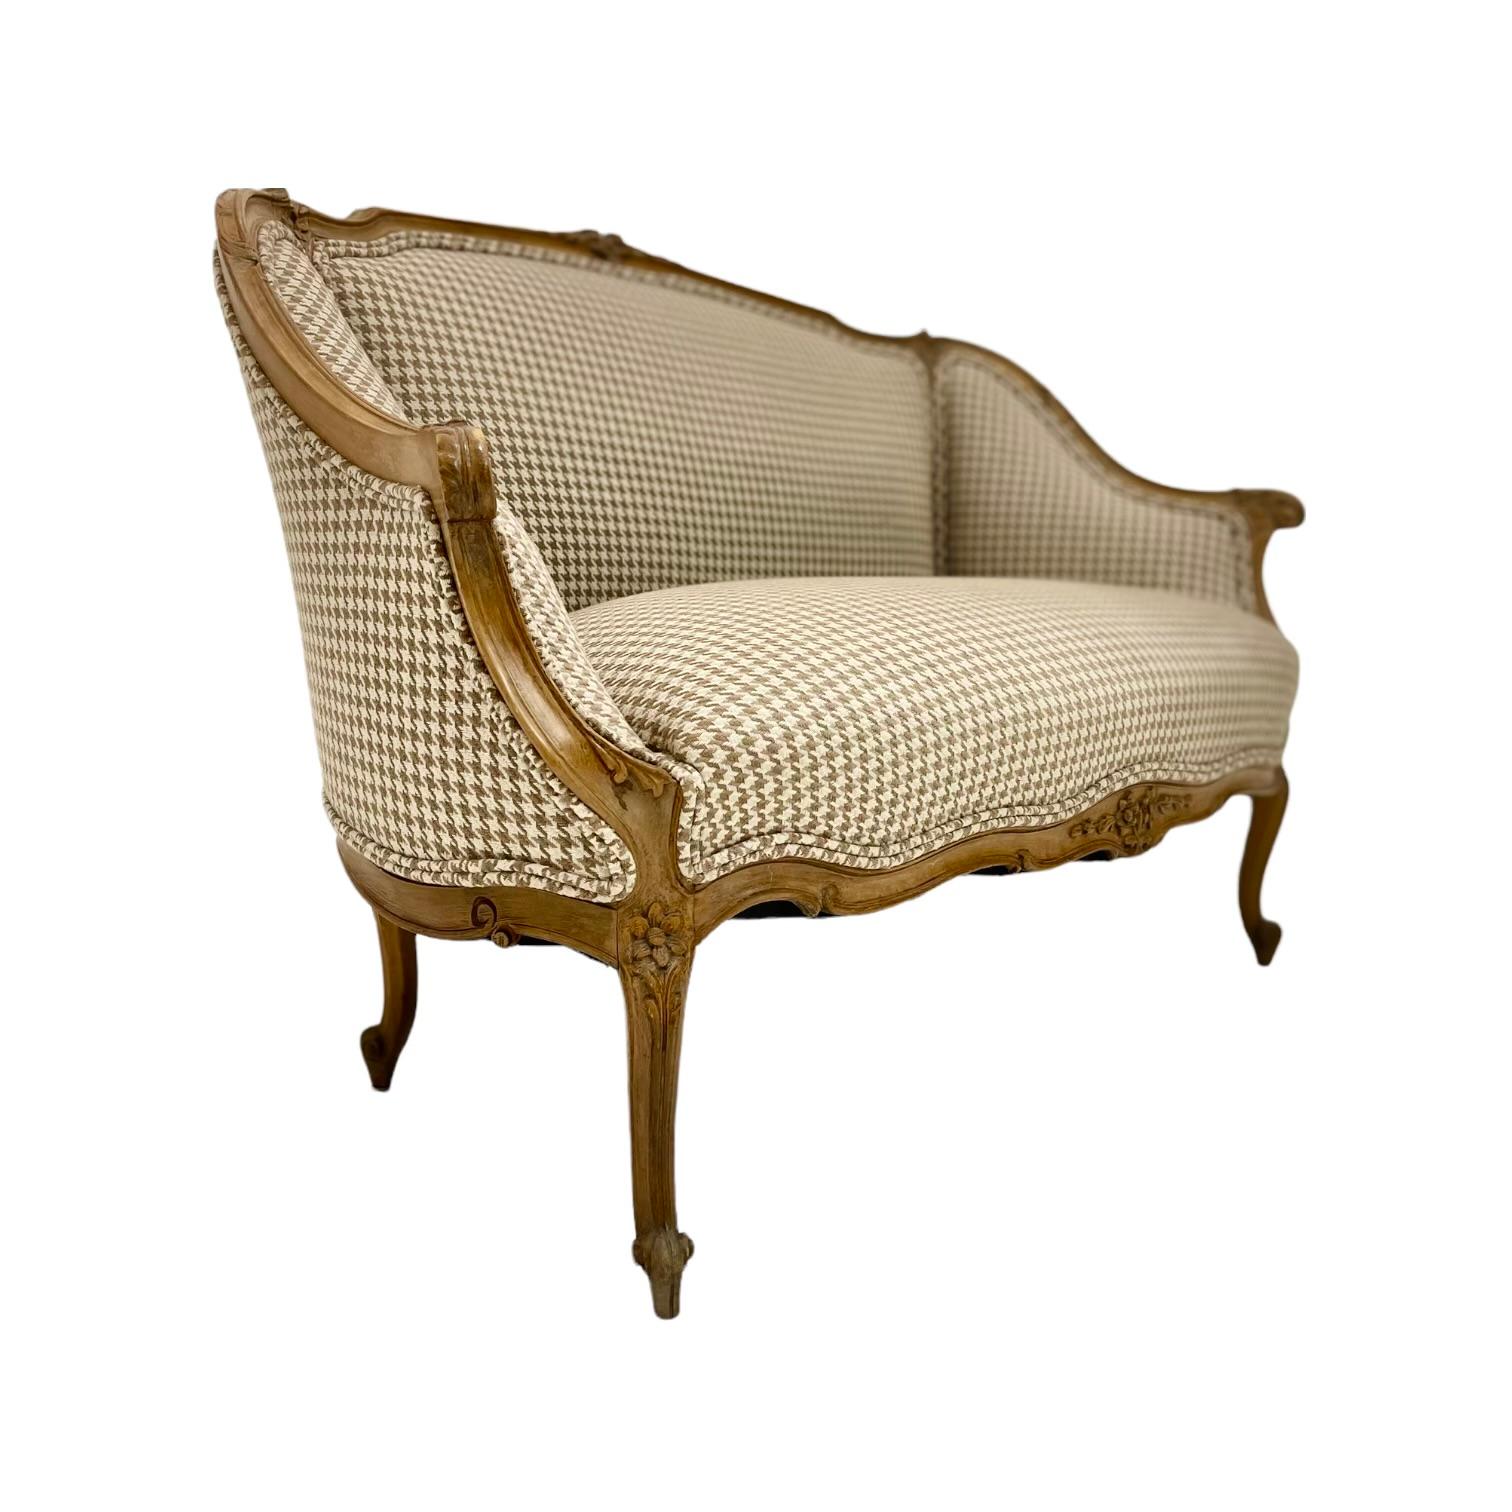 This French Provincial style sofa is a fine strike piece for a bedroom, parlor, or study. The lengthy back supports up to 3 or more people as it has a sturdy wood frame as well. The combination foam and feather cushions offer maximum comfort and